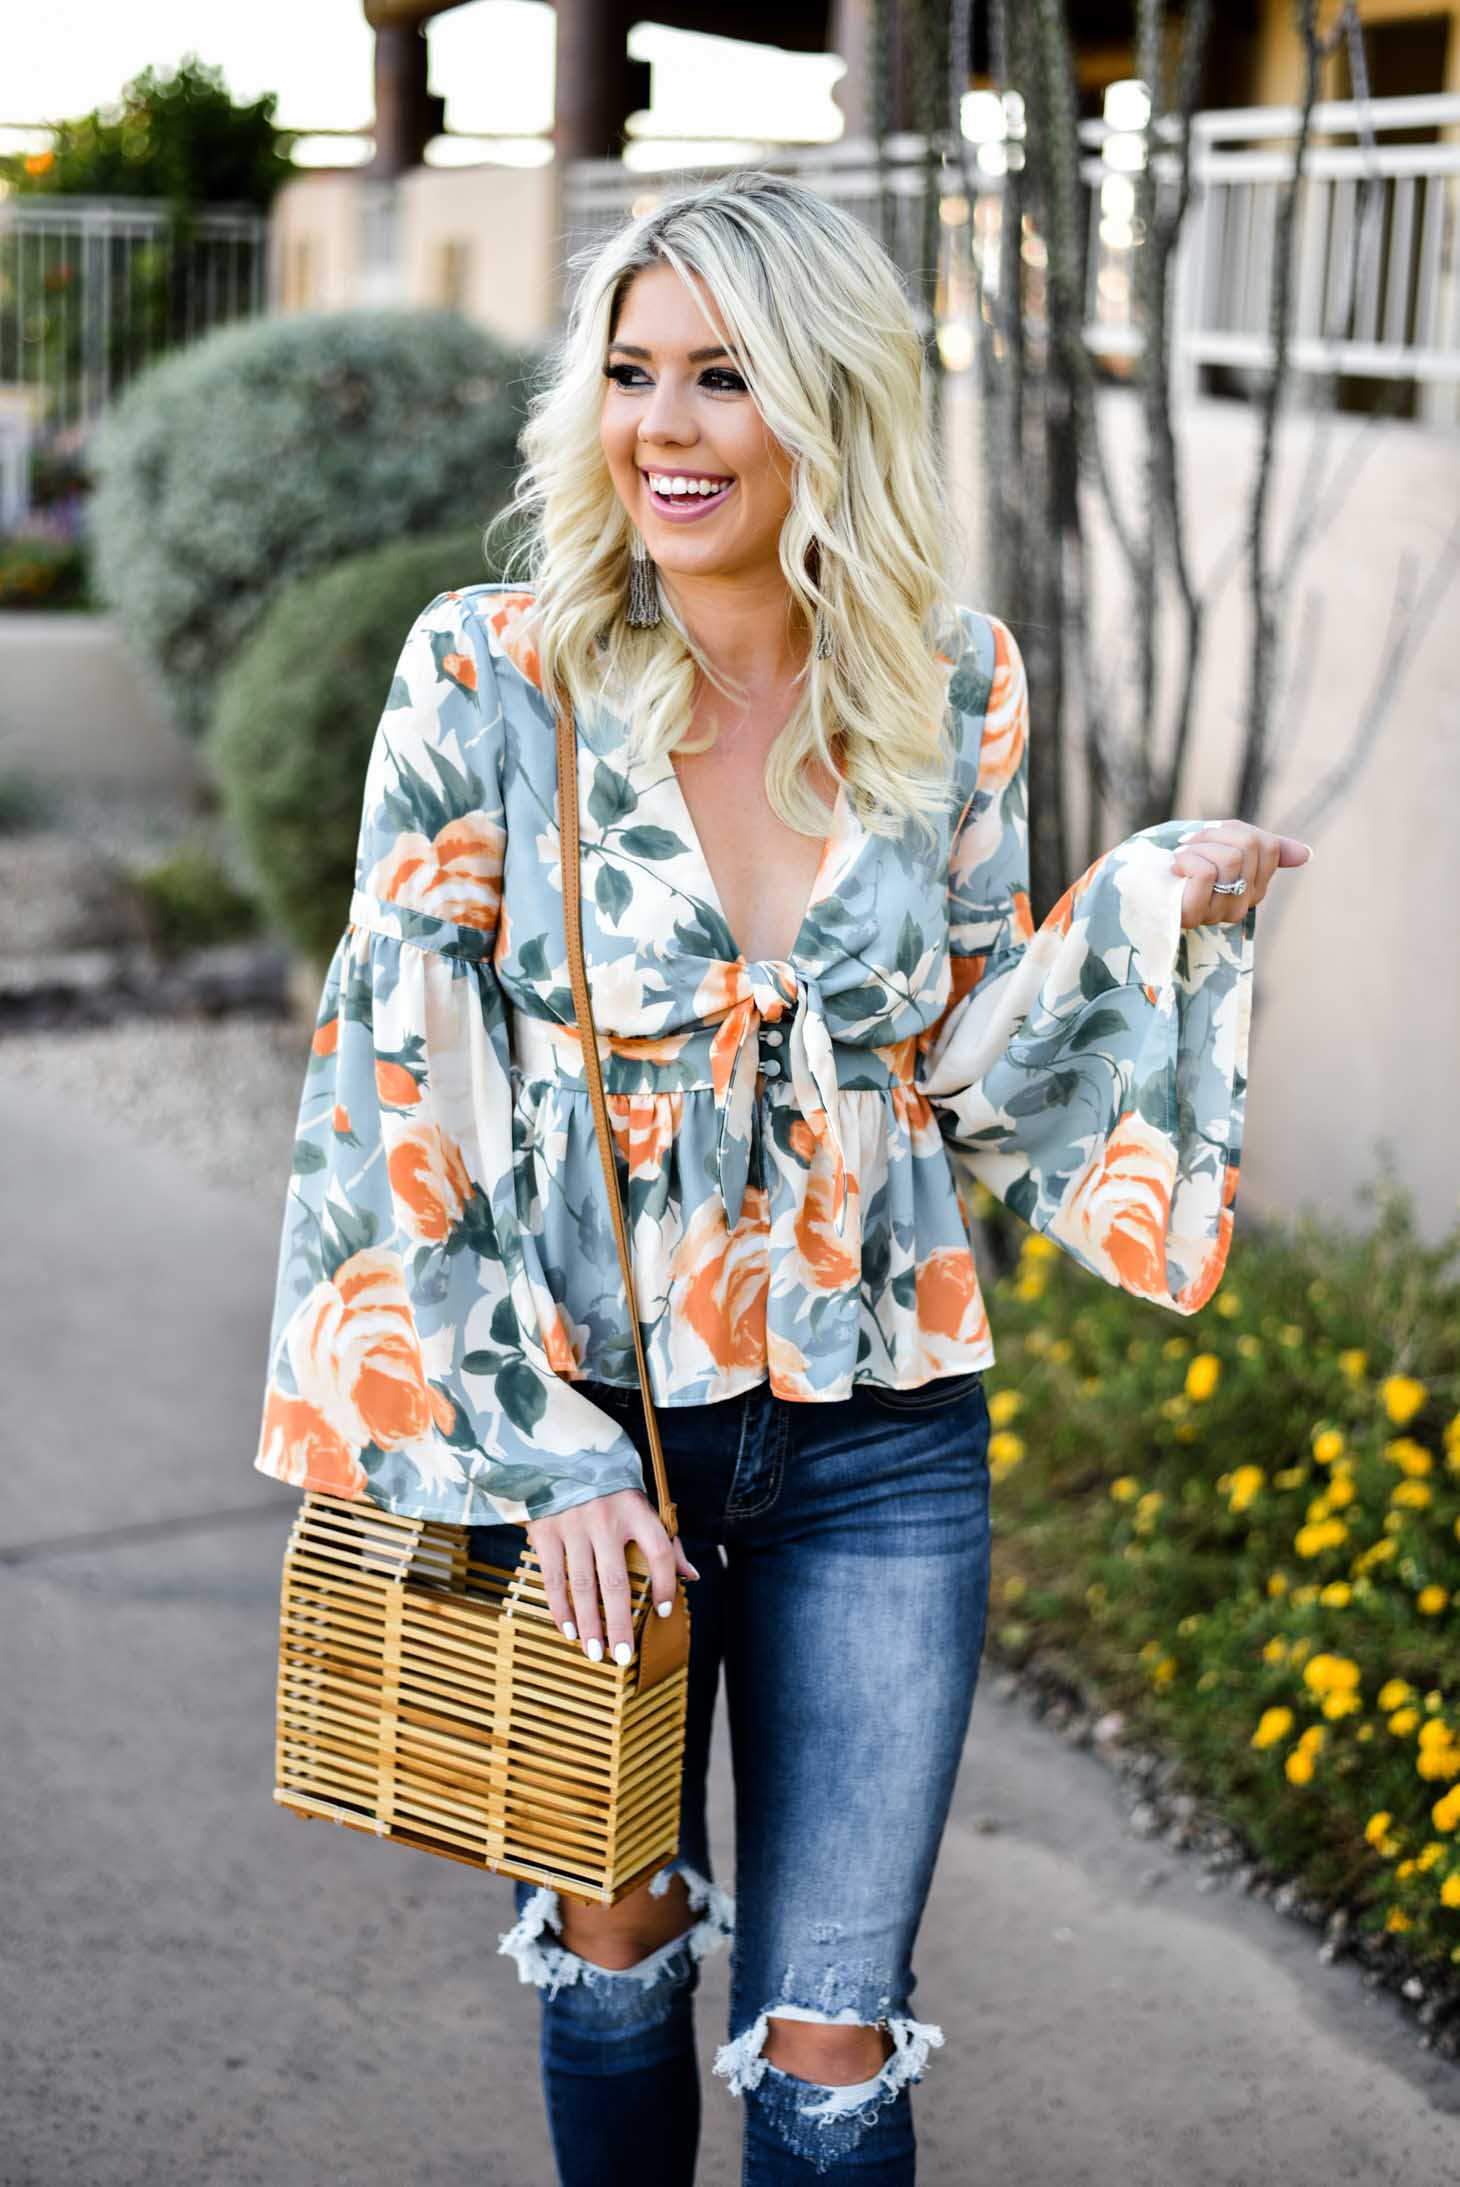 Erin Elizabeth of Wink and a Twirl in this Vici Dolls Jeans and Summer Floral Top